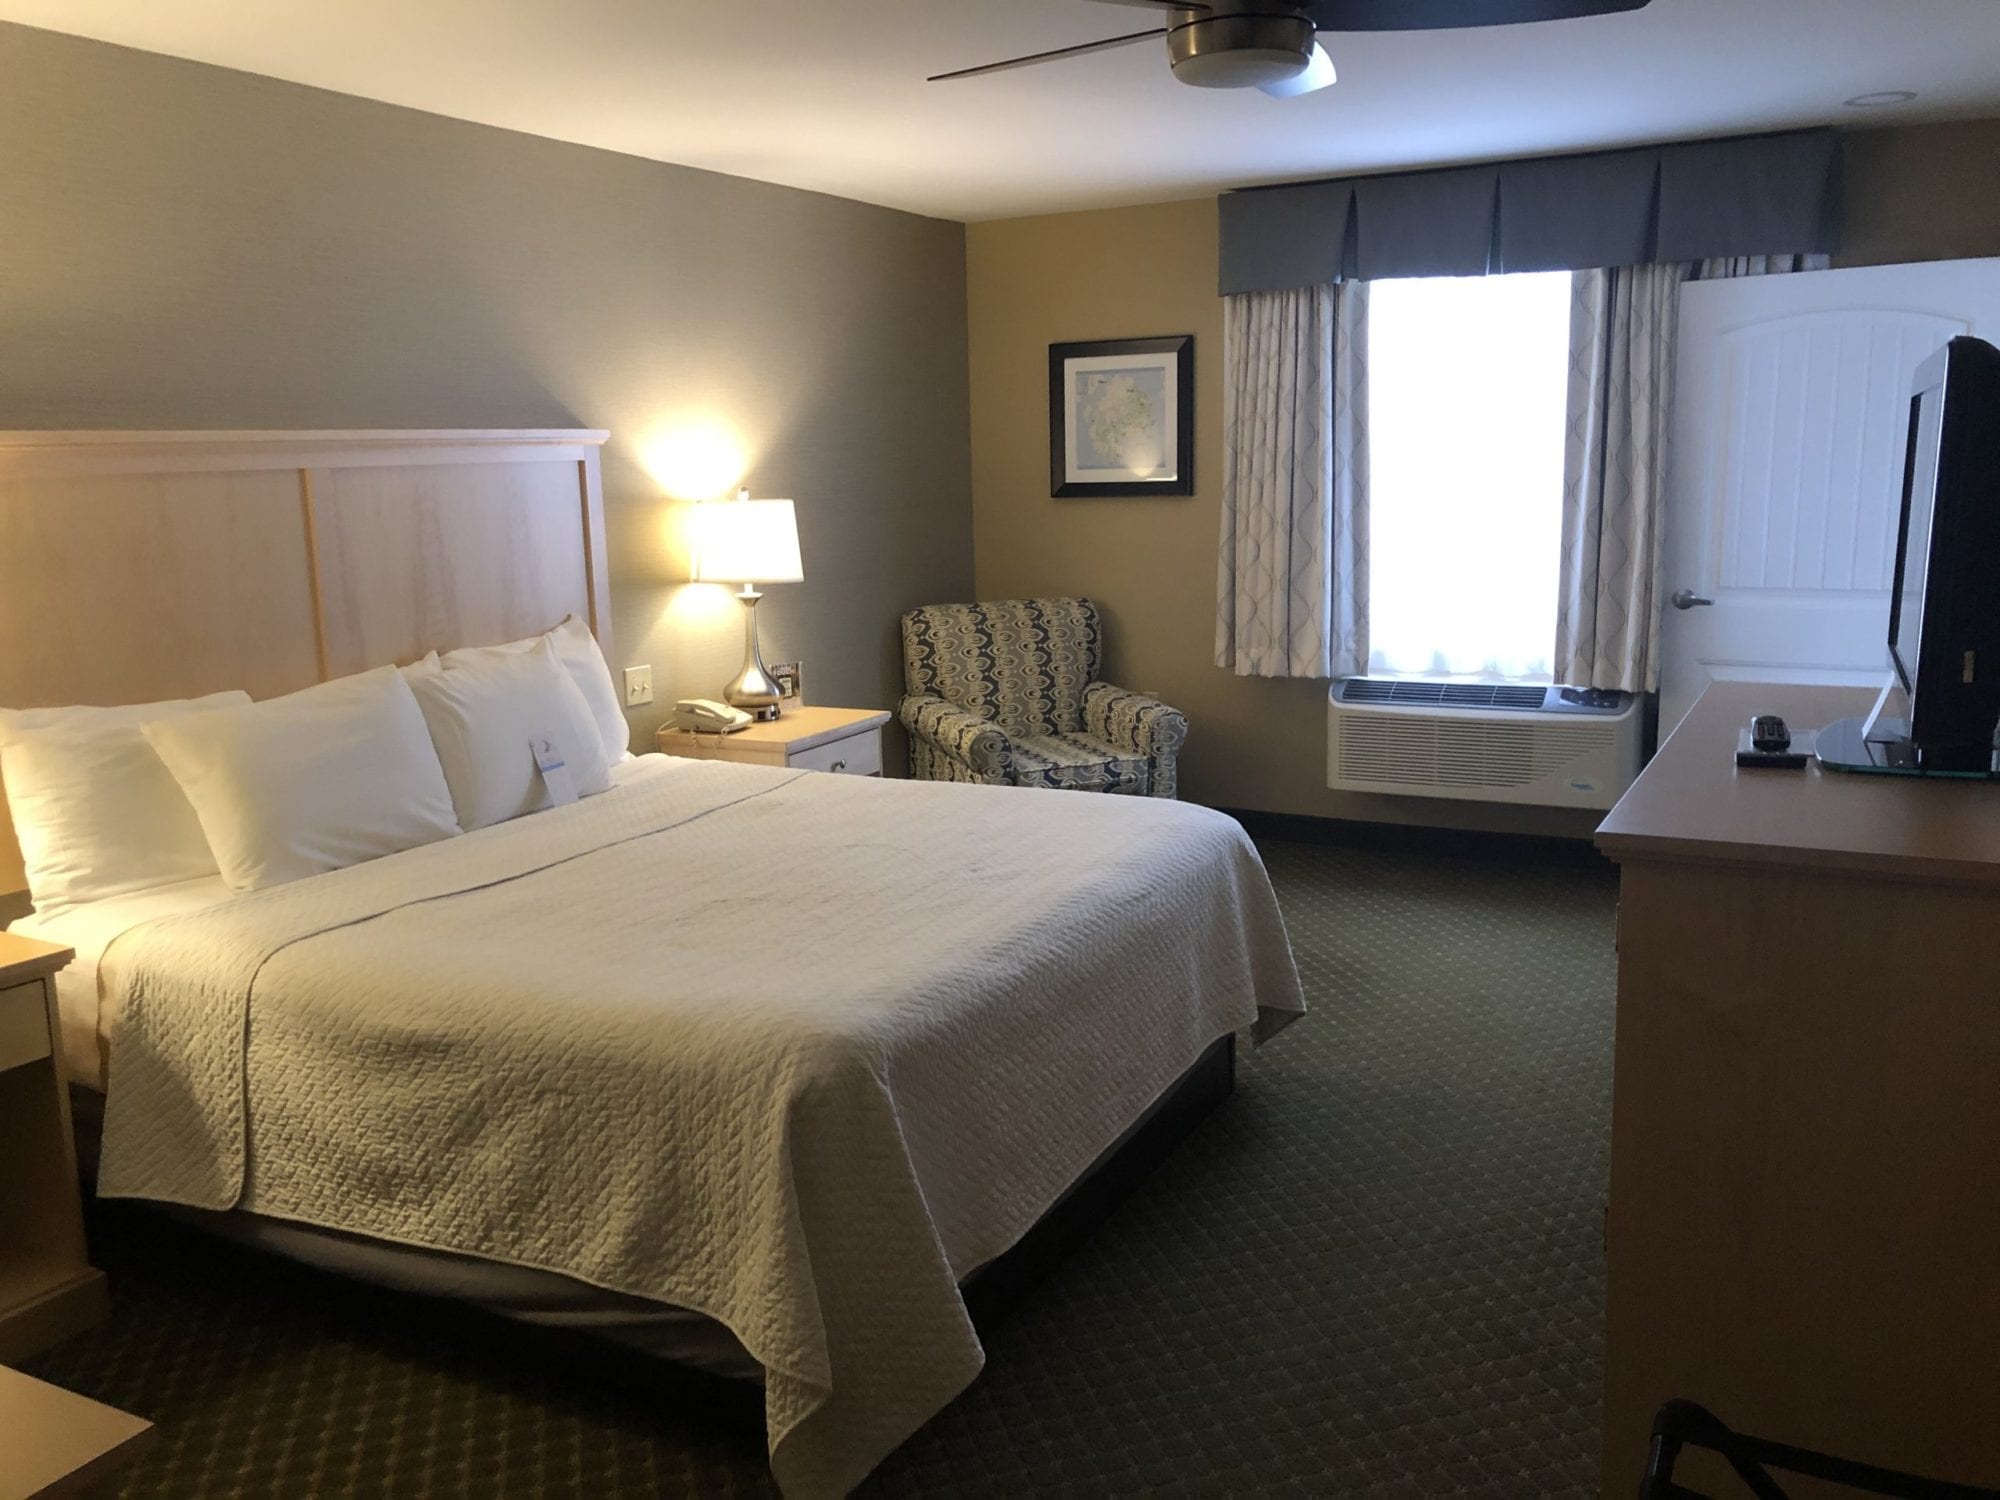 Photo of the bedroom of the Accessible King Suite at the Acadia Inn.